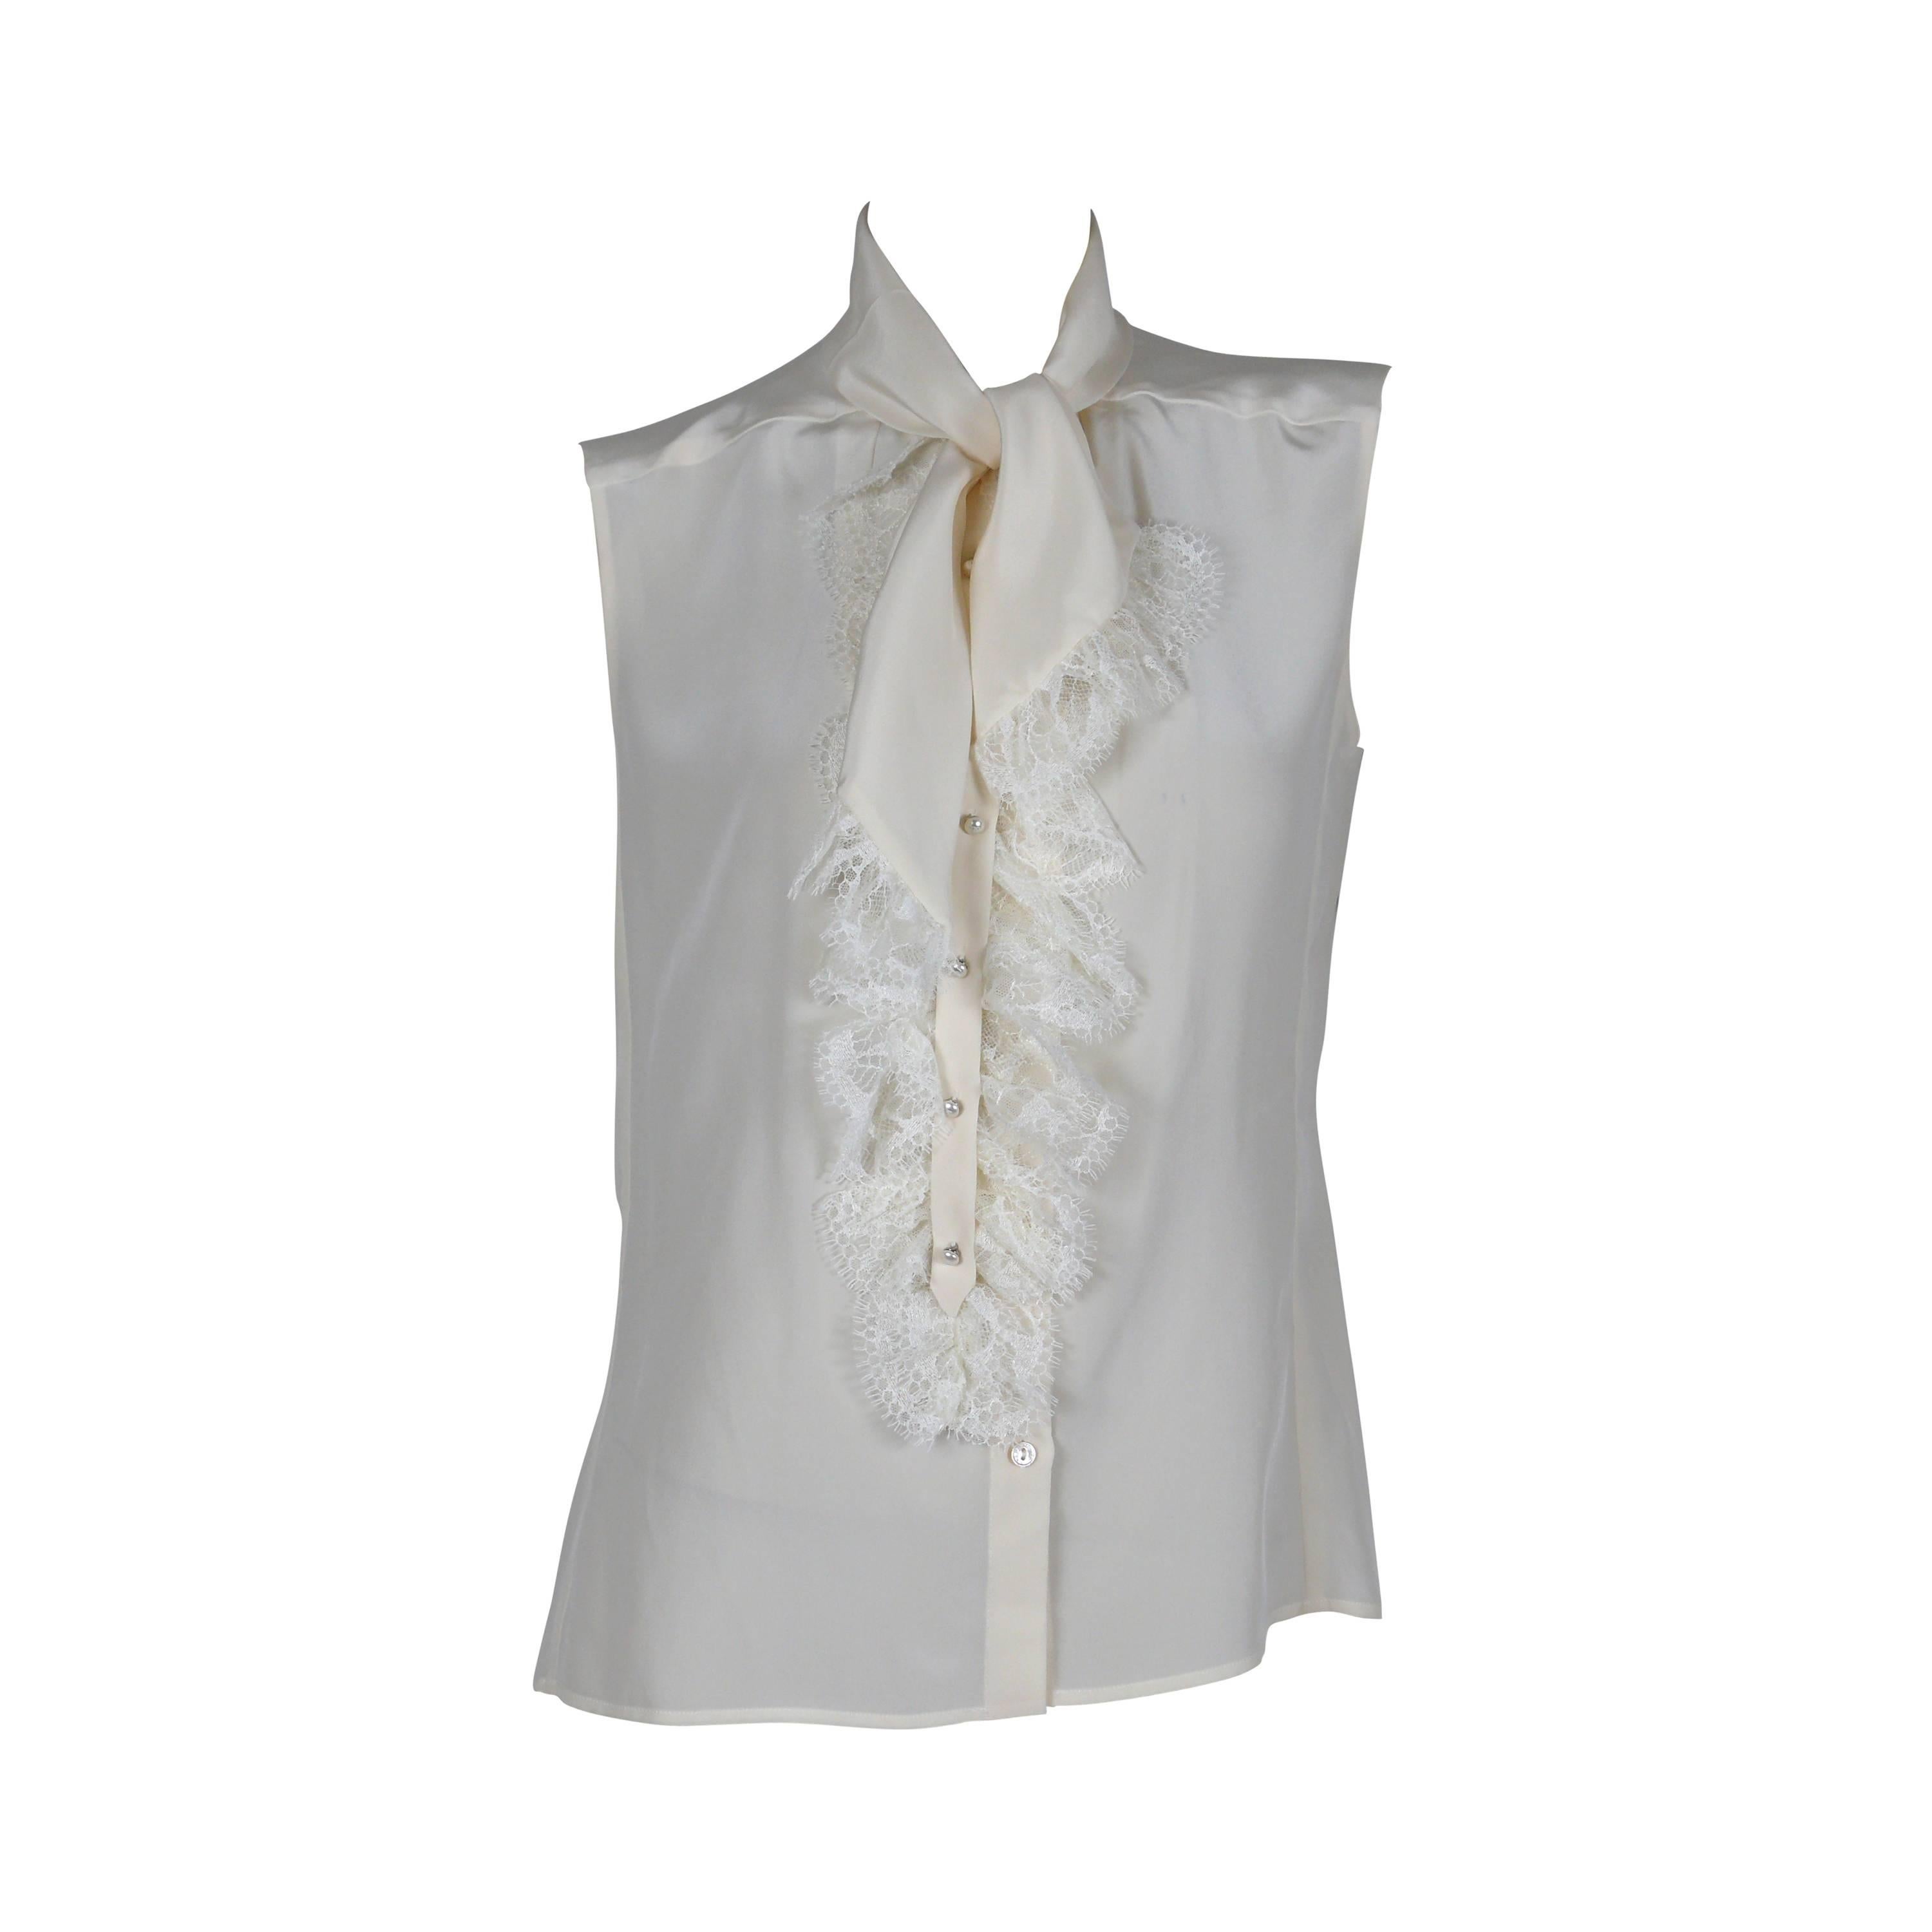 Chanel Off-White Sleeveless Silk Blouse with Lace Jabot Detail Fall 2004